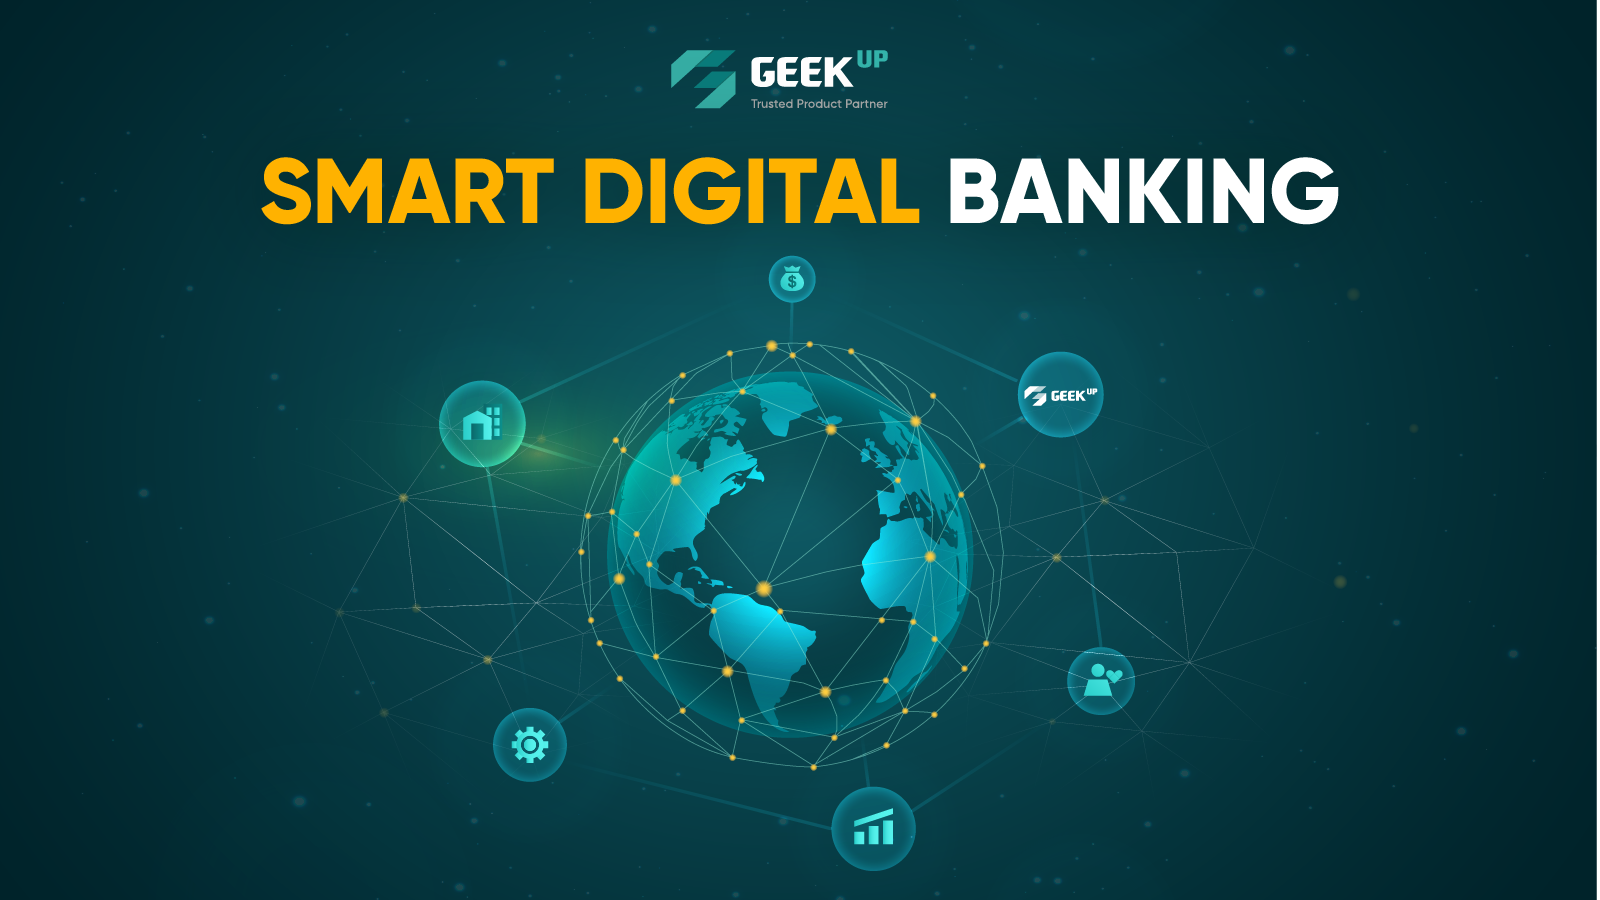 Tech experts share 'golden key' to help Banking organizations attract customers